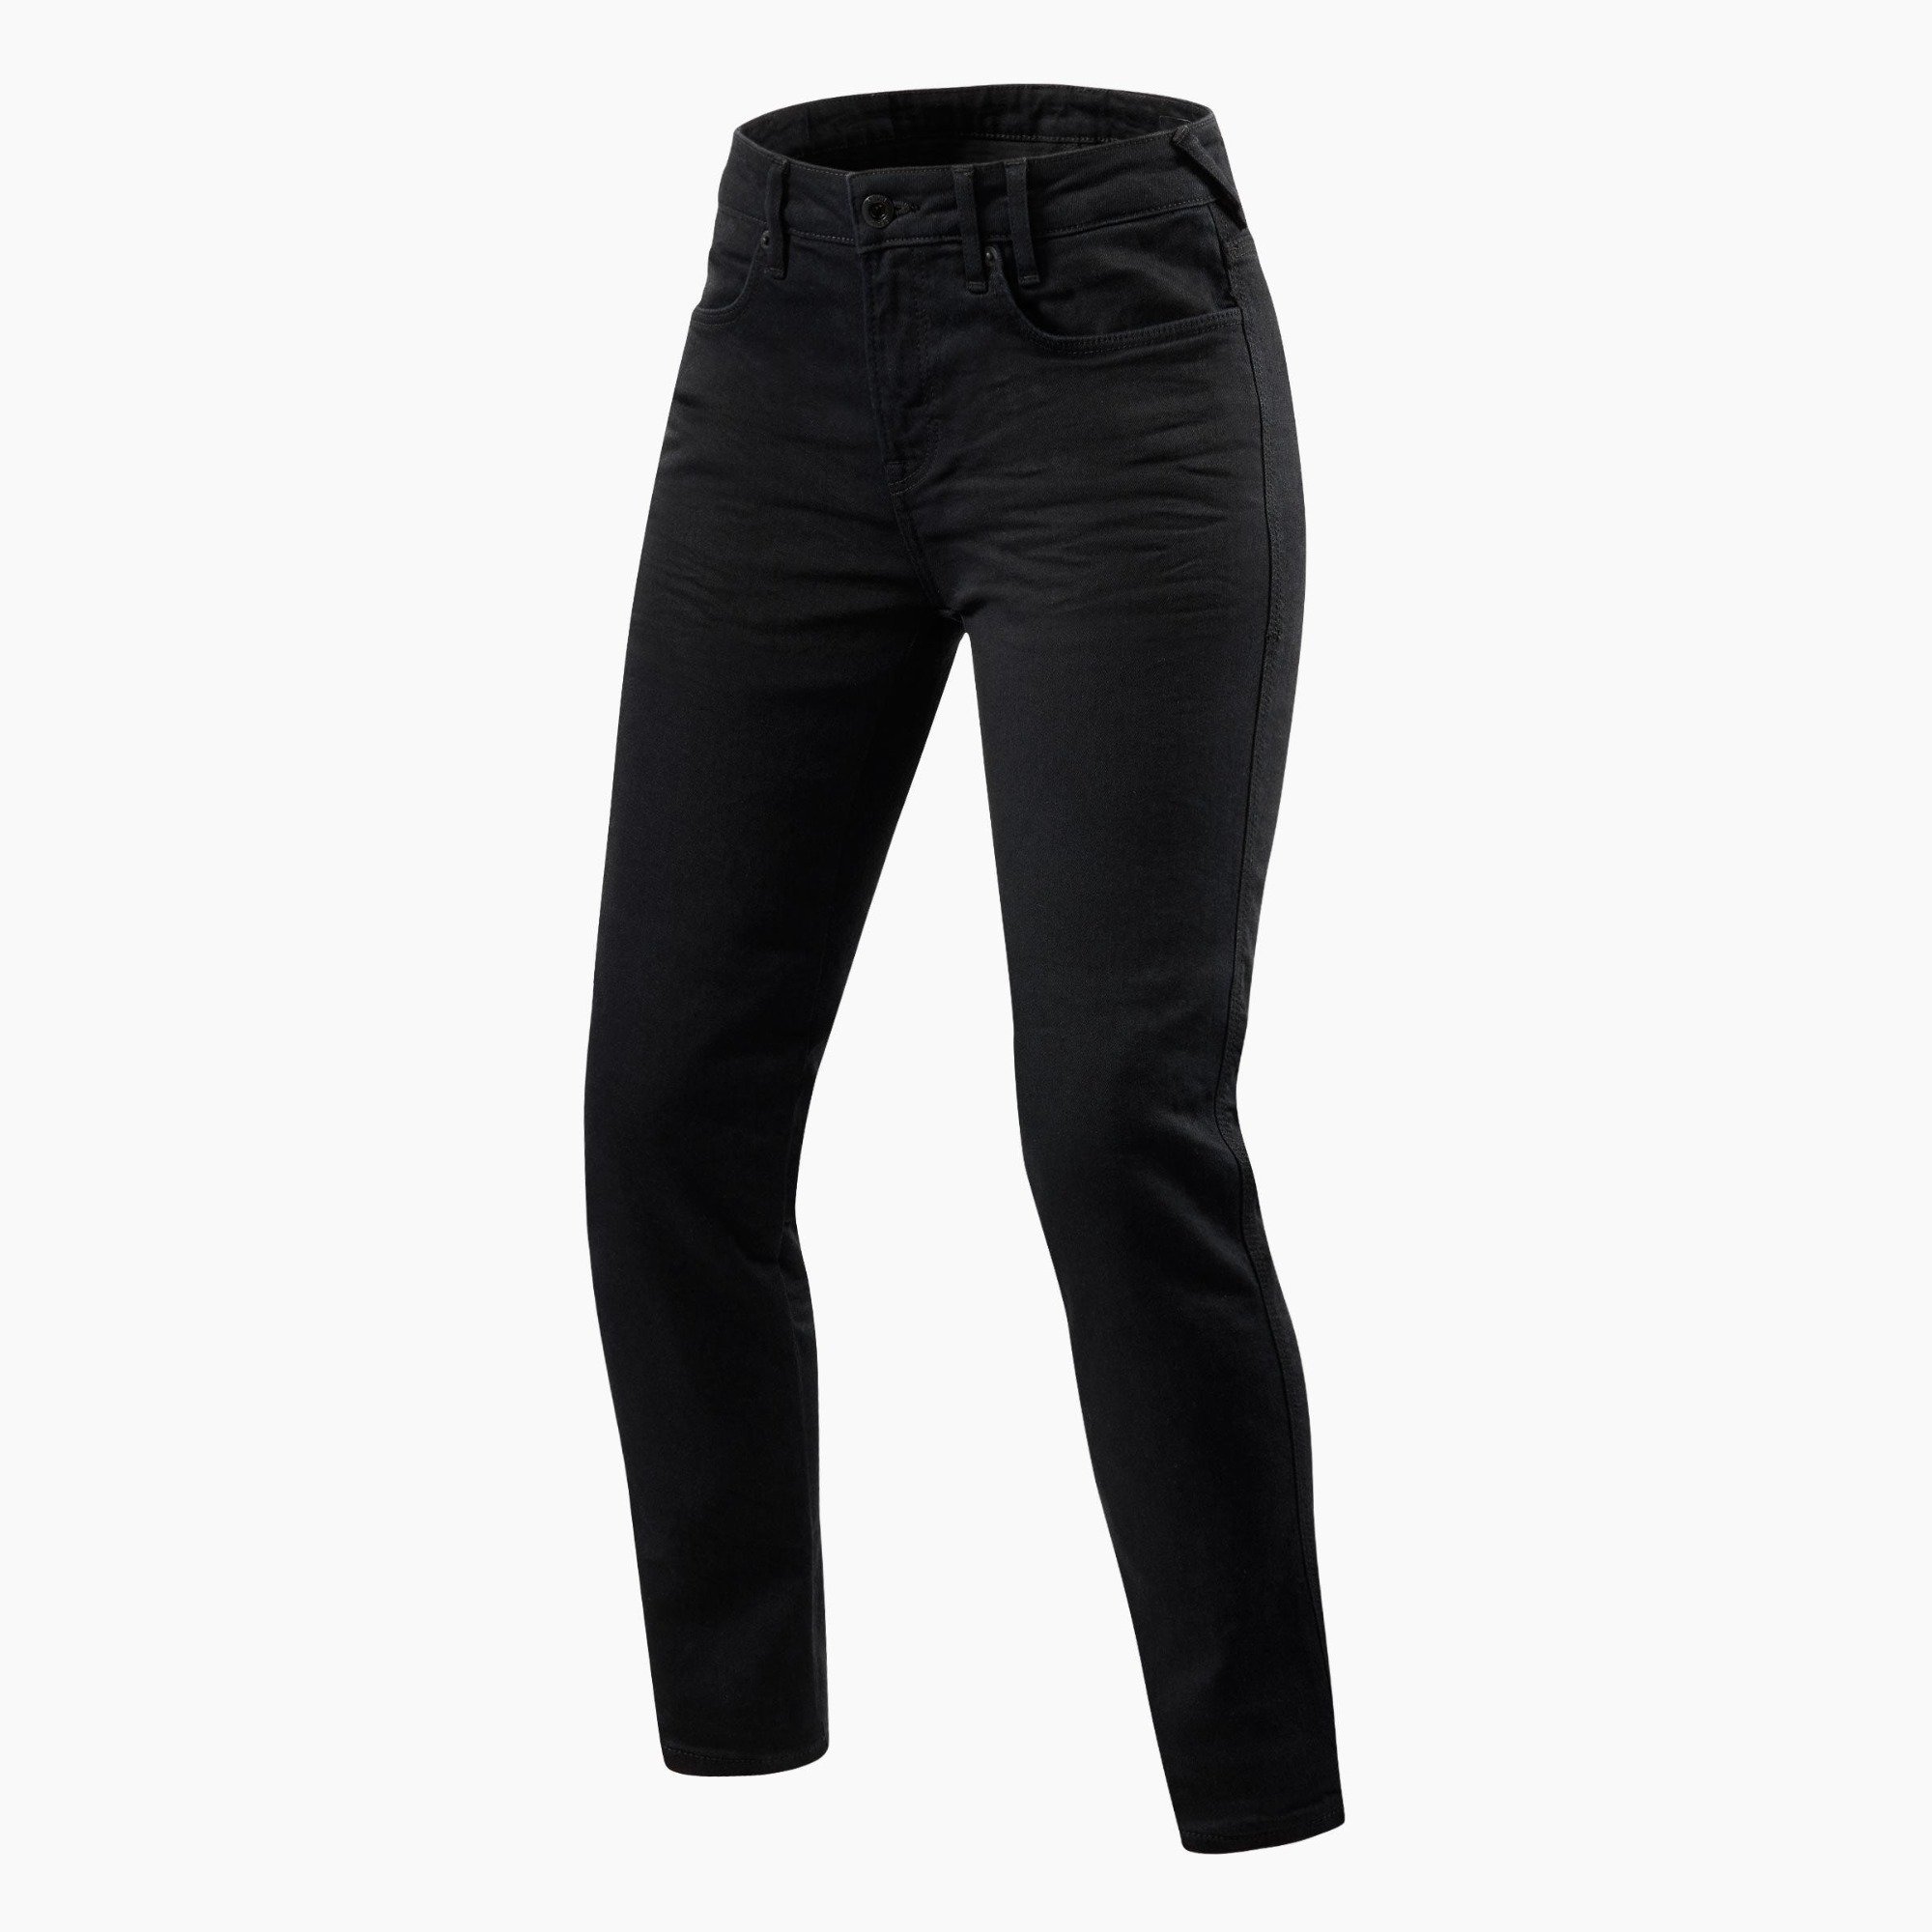 Image of REV'IT! Jeans Maple 2 Ladies SK Black Motorcycle Jeans Size L32/W26 ID 8700001342209